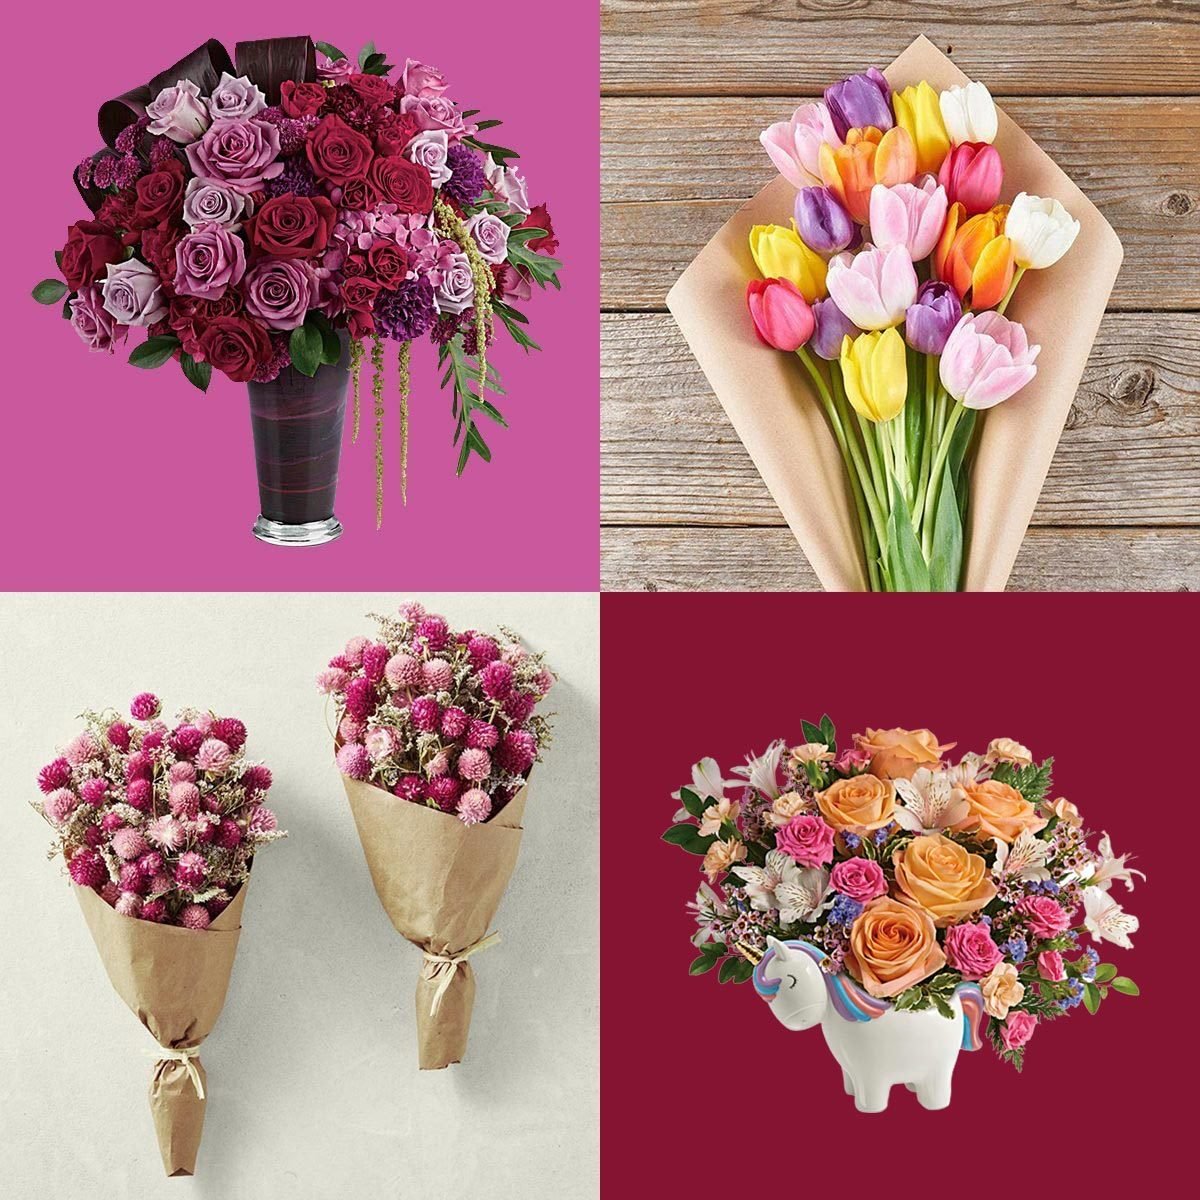 https://www.rd.com/wp-content/uploads/2021/01/Valentines-Day-Flowers-colorblock-collage_FT.jpg